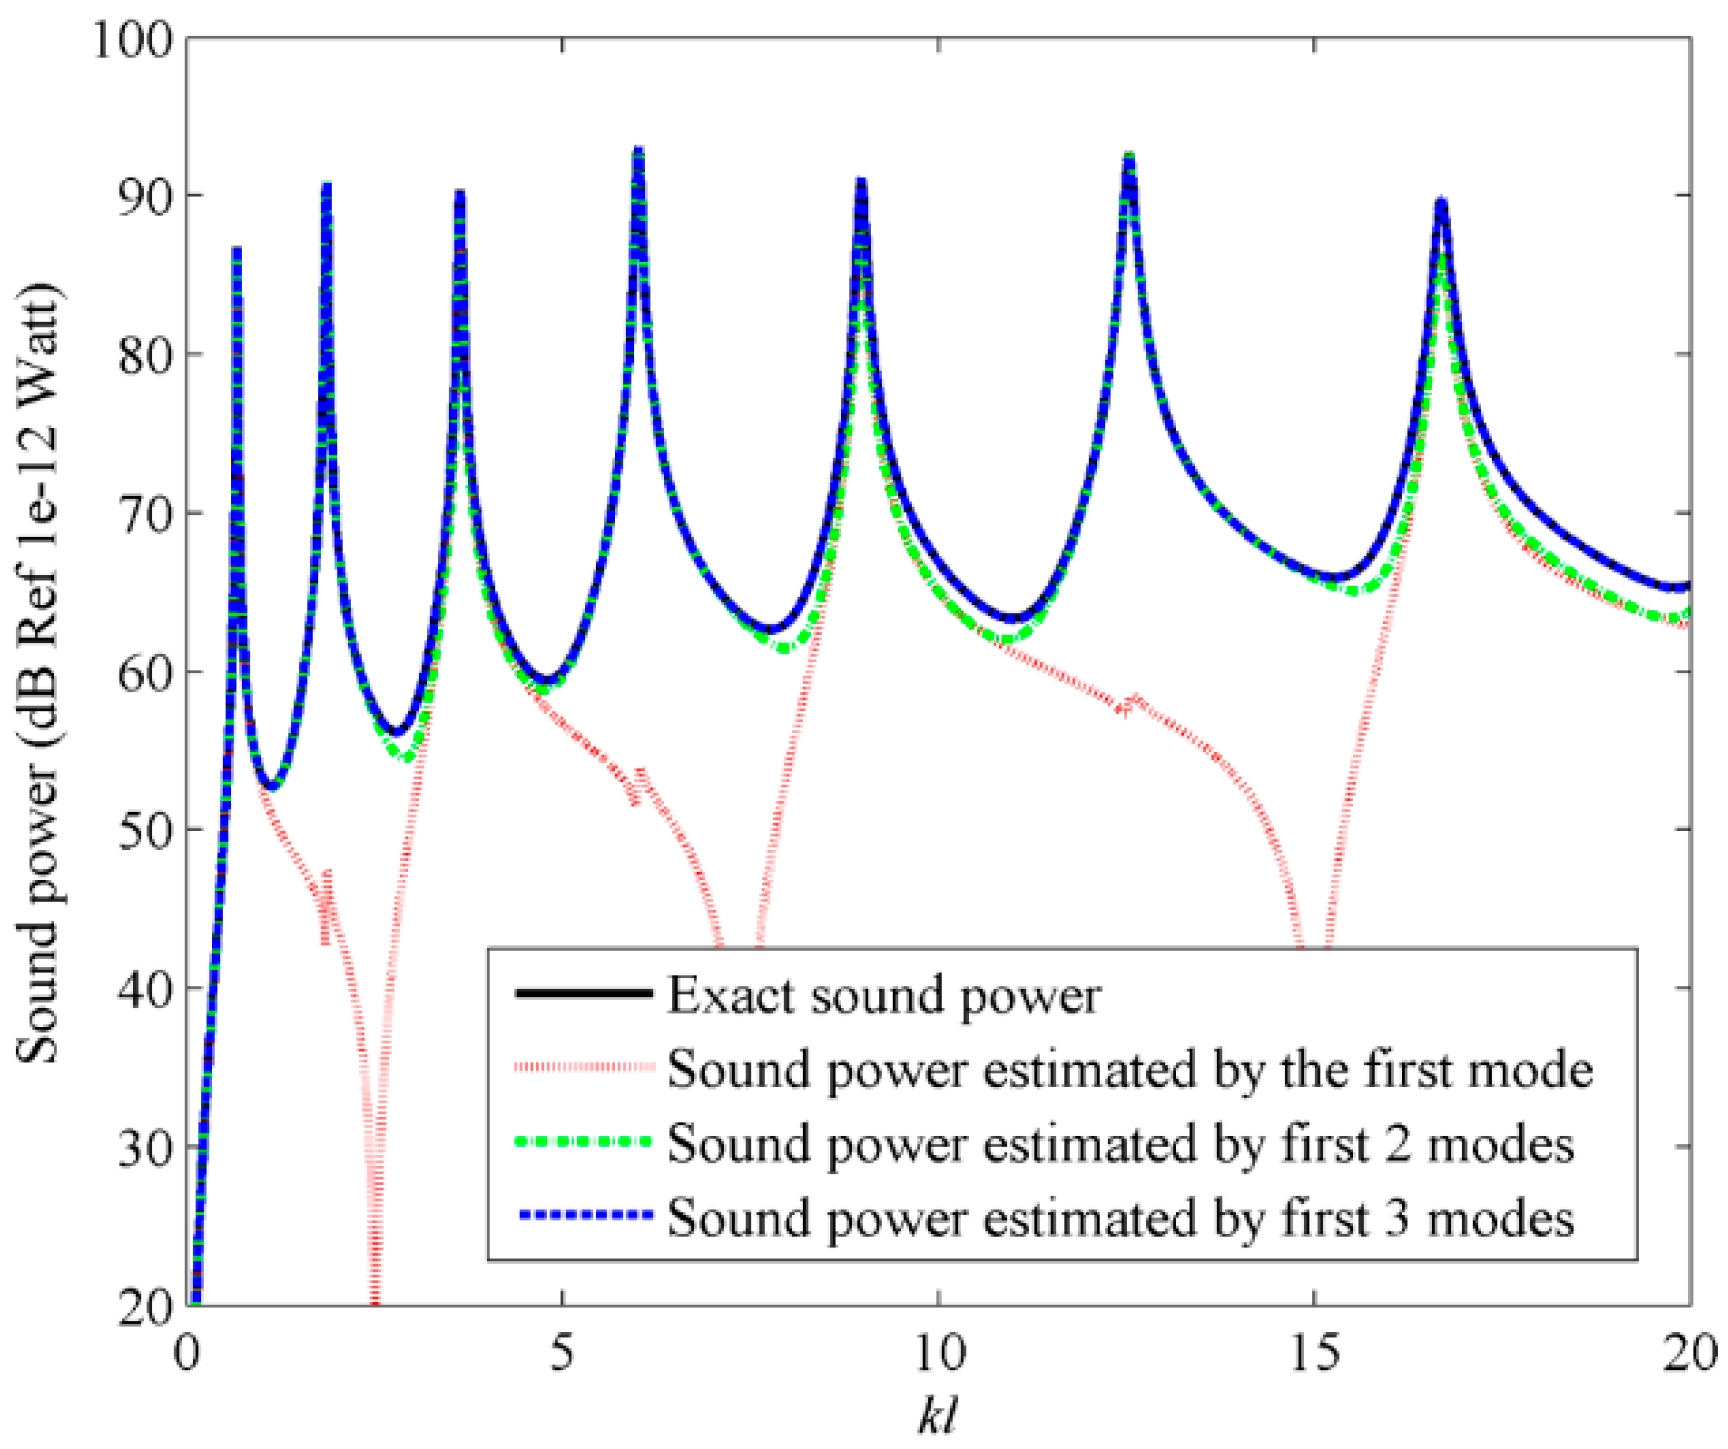 Xn2x - Sensors | Free Full-Text | Sound Power Estimation for Beam and ...